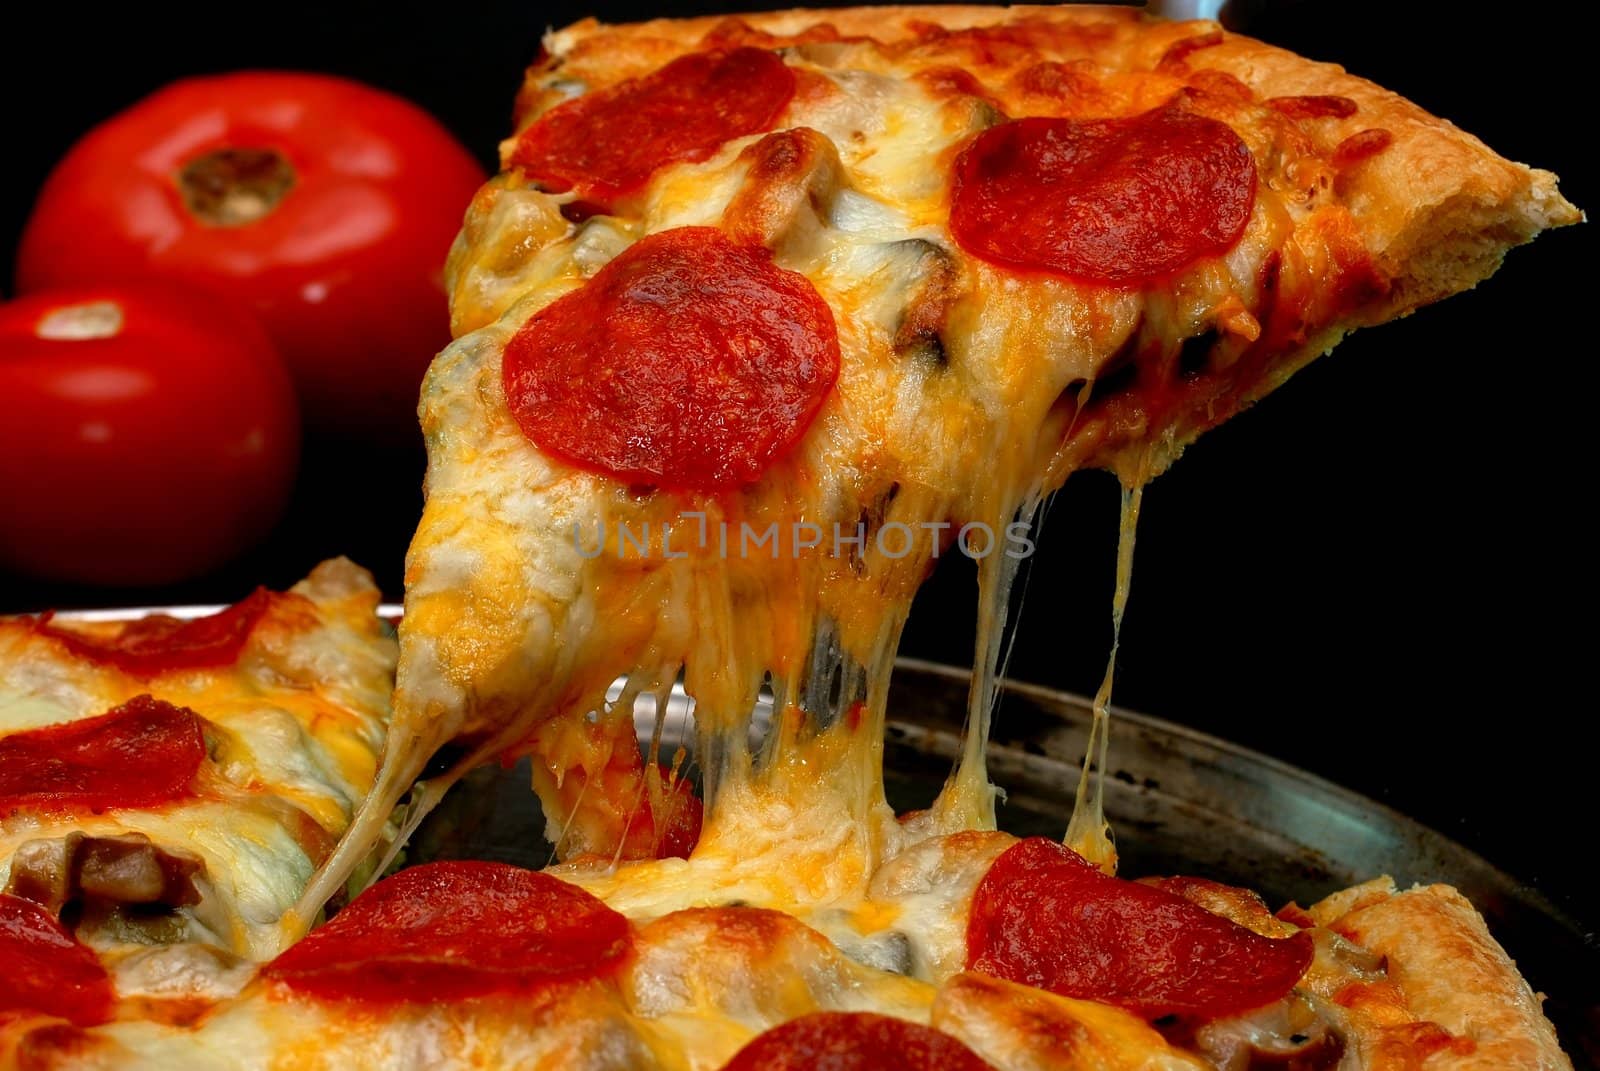 Slice of pepperoni pizza being removed from whole pizza with tomatoes in background.  Isolated on black background.